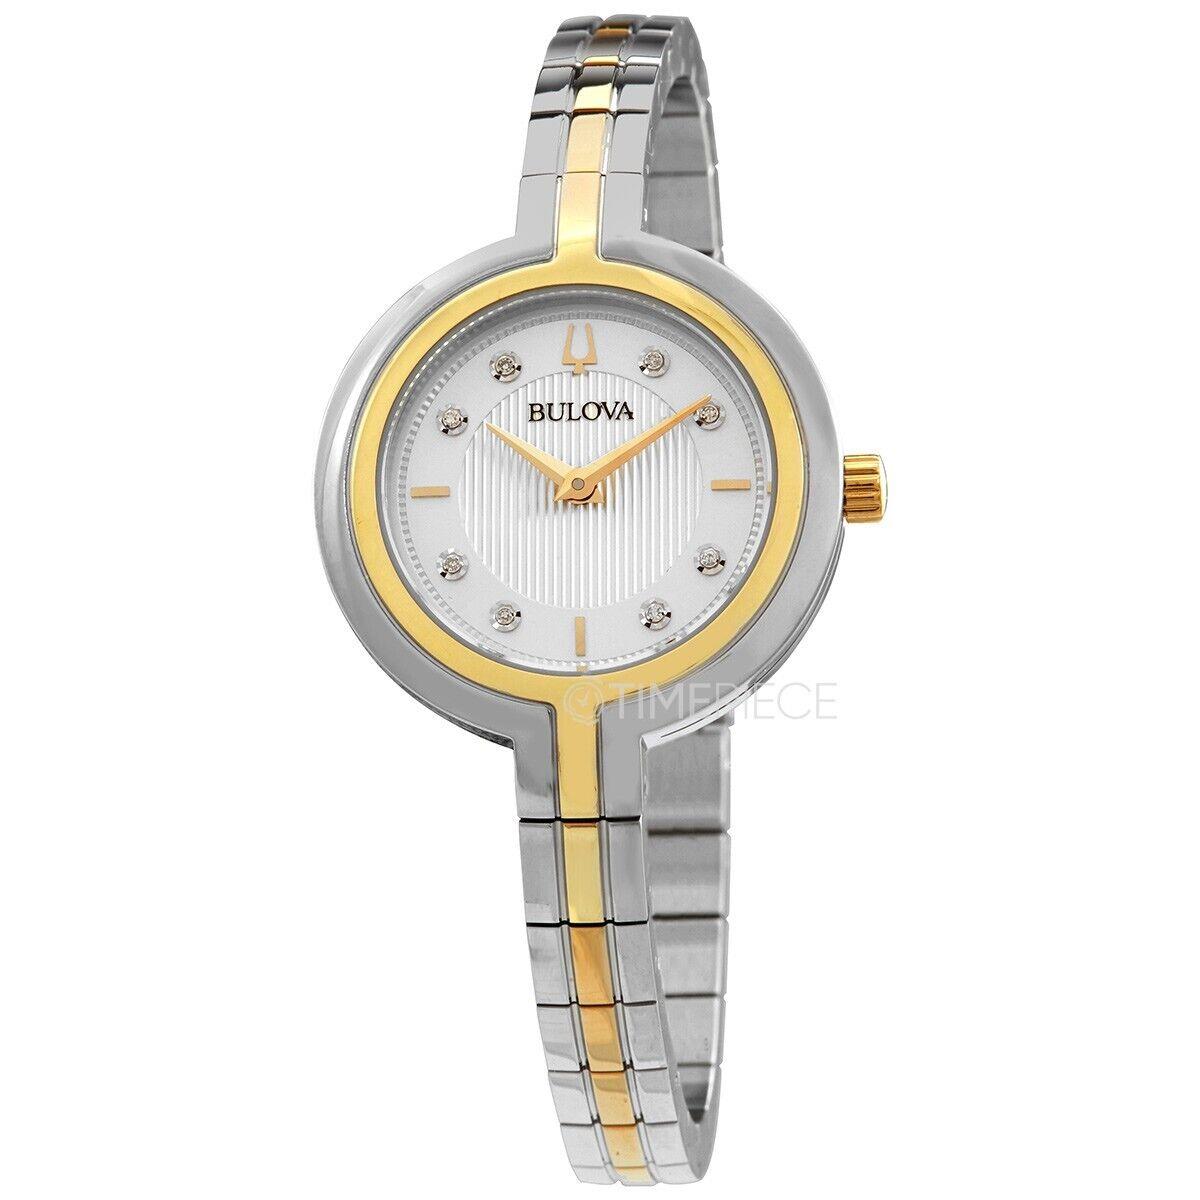 Bulova 98P193 Rhapsody Silver Diamond Dial Two Tone Stainless Steel Womens Watch - Dial: Silver, Band: Gold, Bezel: Gold